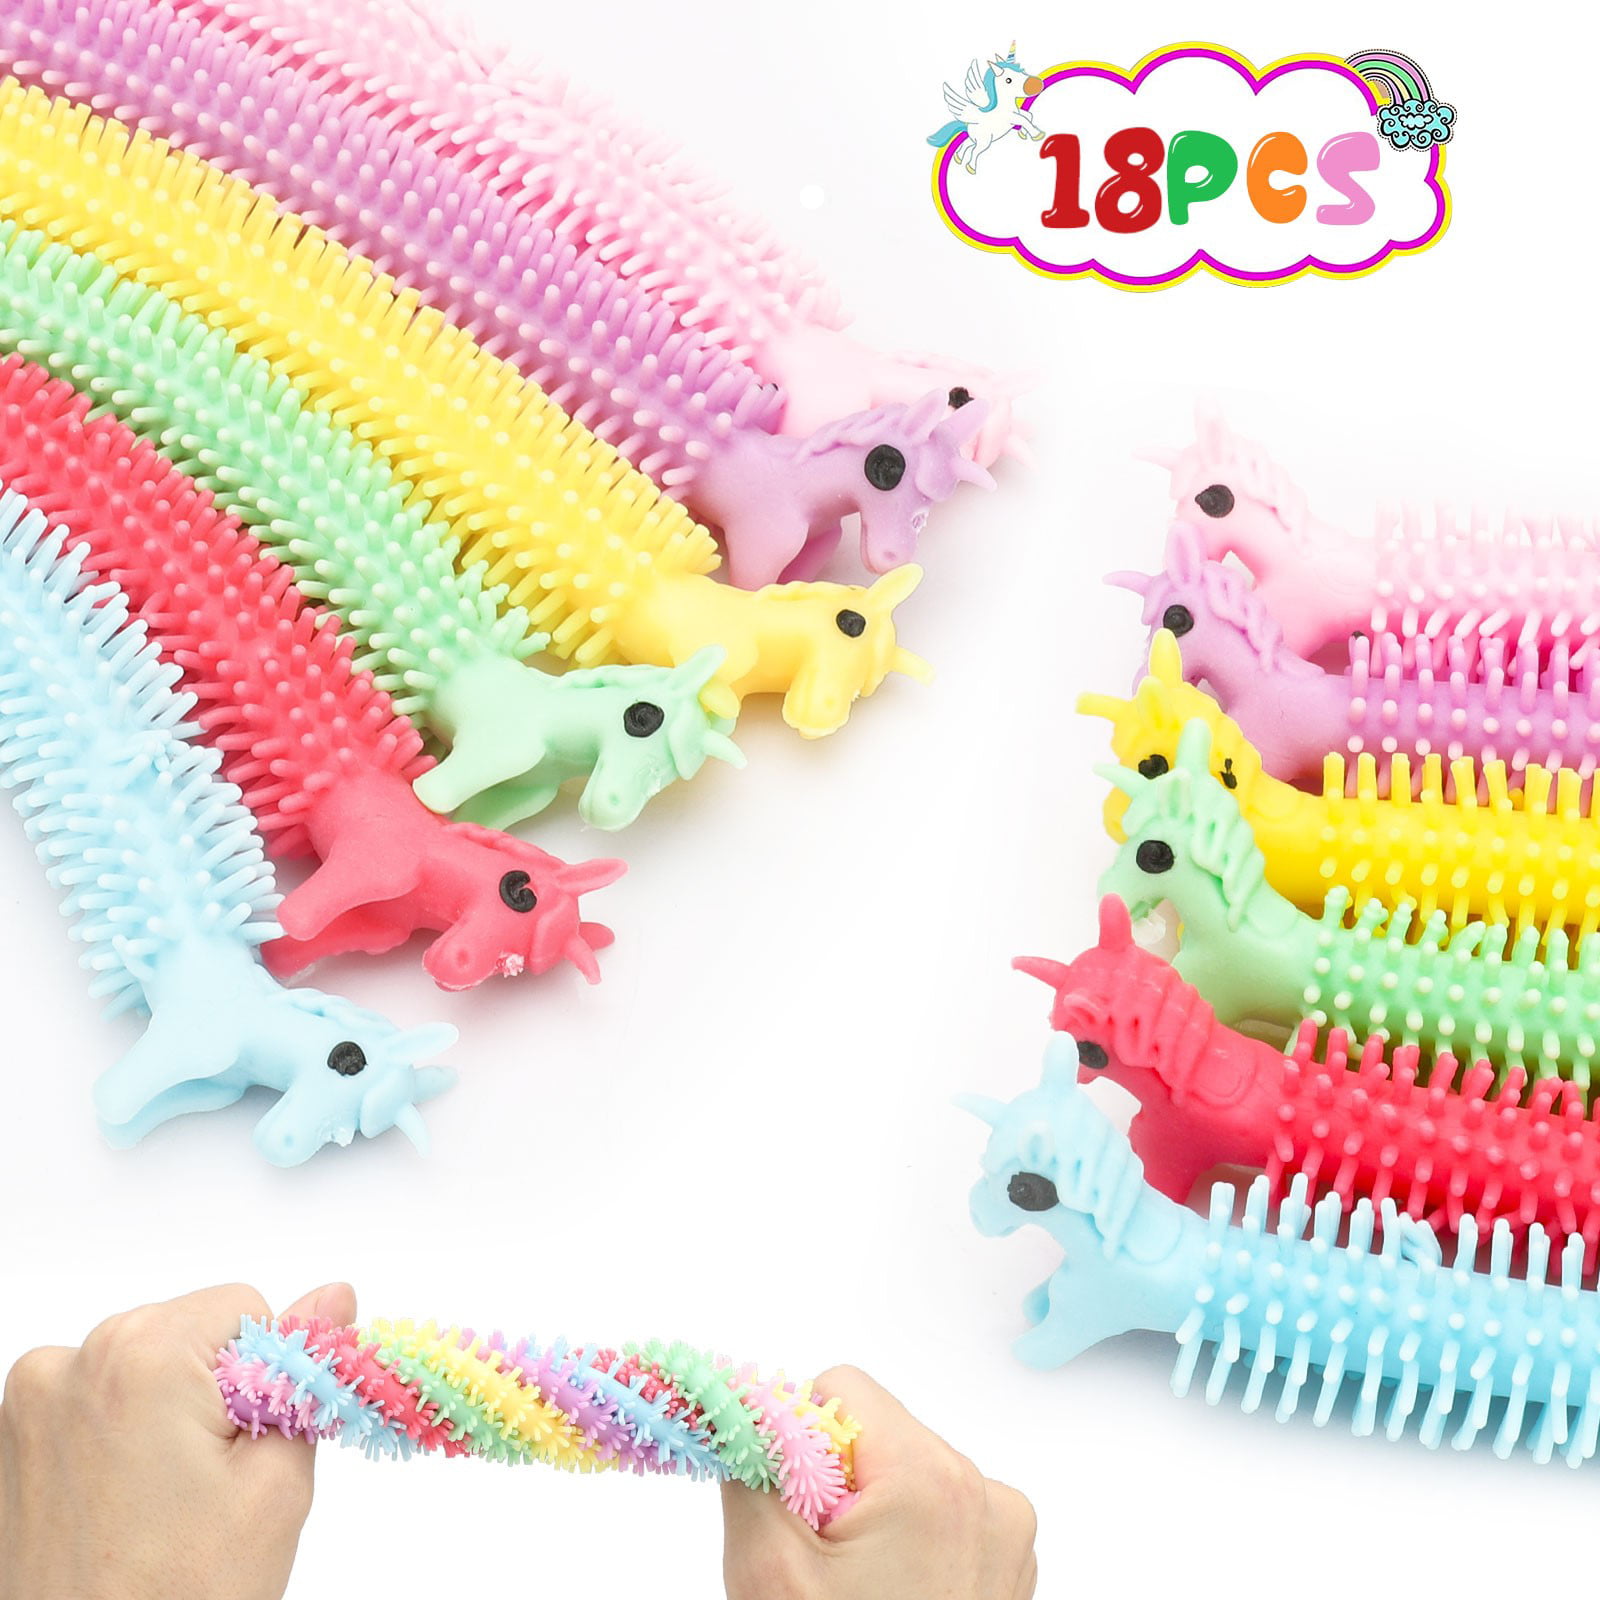 6X Tpr Noodle Stretch Toy Stretchy String Fidget for Kid Cool Antistress Anxiety 